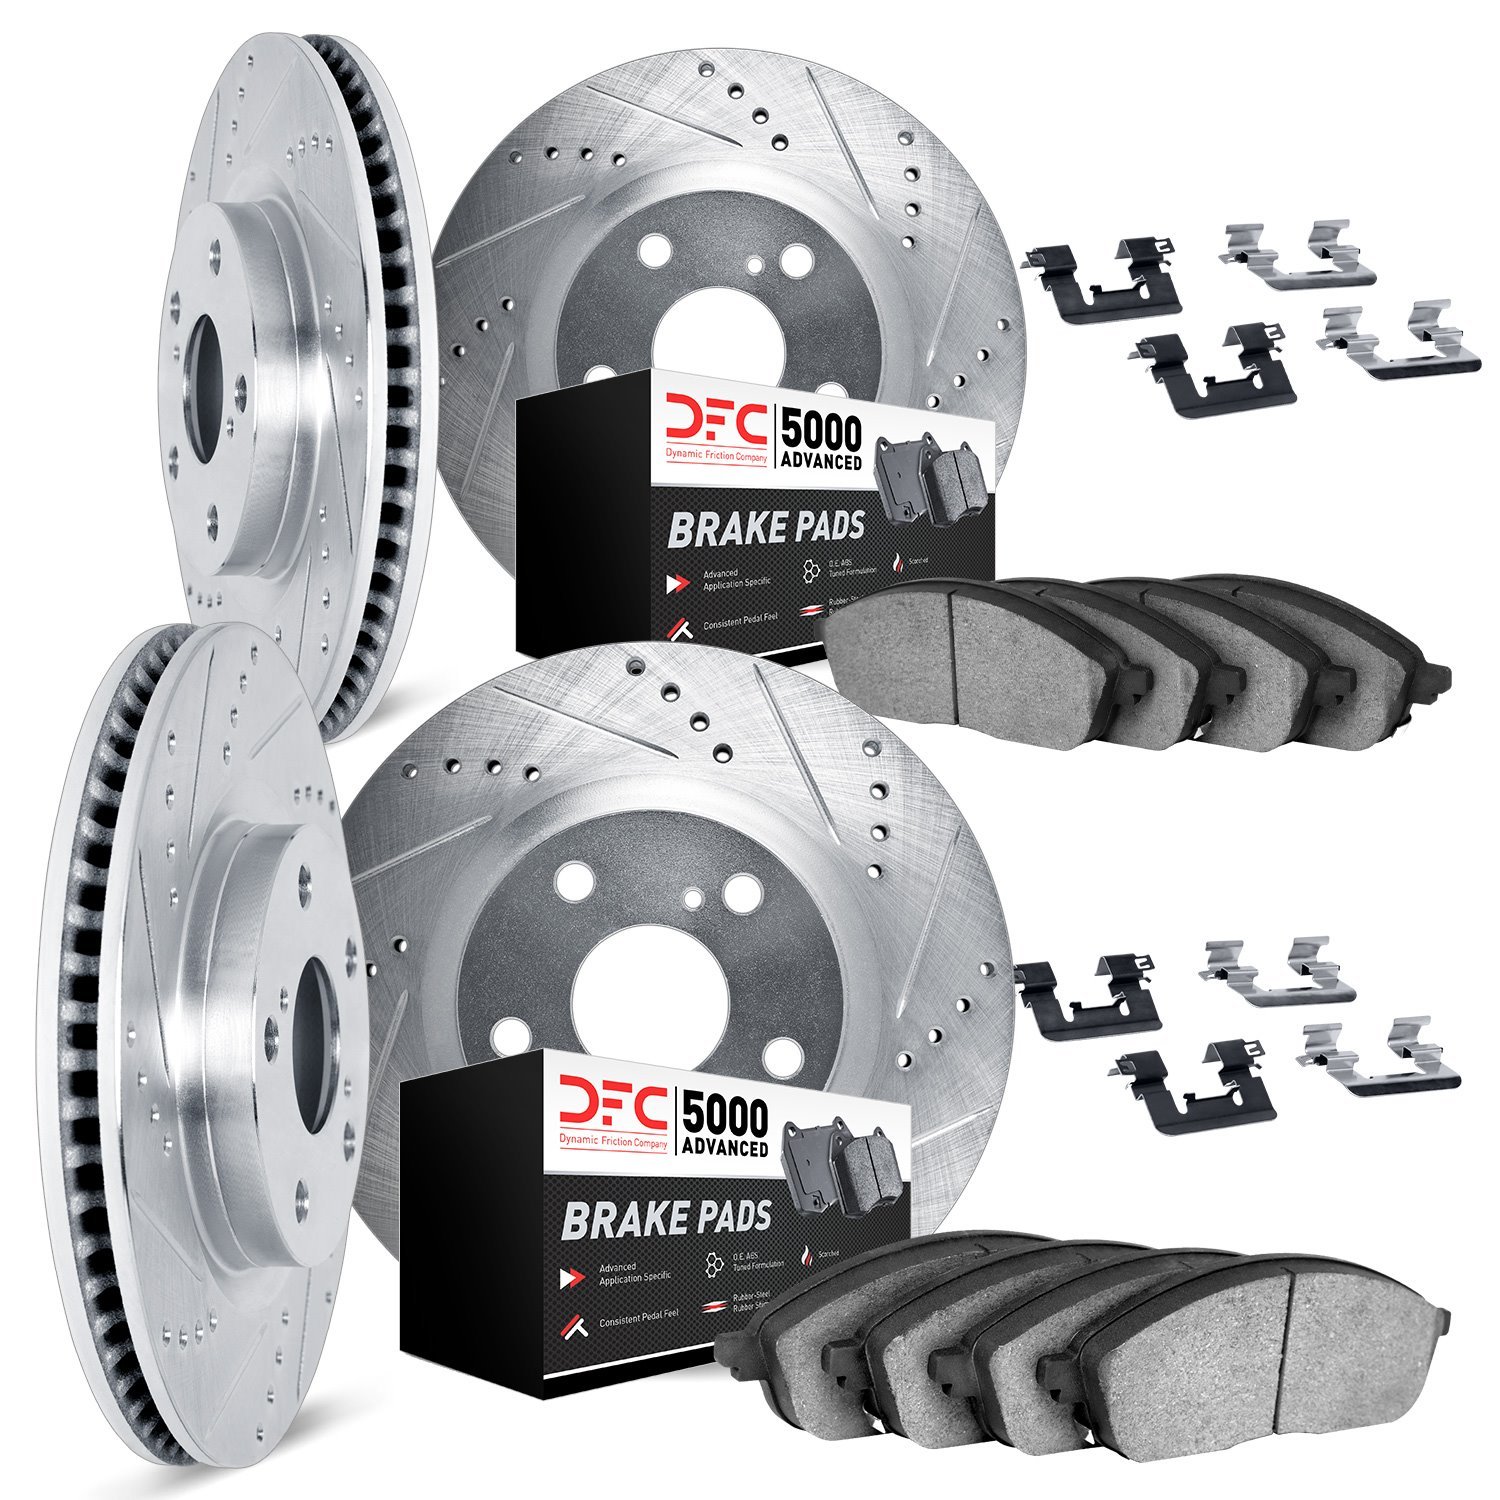 7514-31030 Drilled/Slotted Brake Rotors w/5000 Advanced Brake Pads Kit & Hardware [Silver], 2013-2020 BMW, Position: Front and R